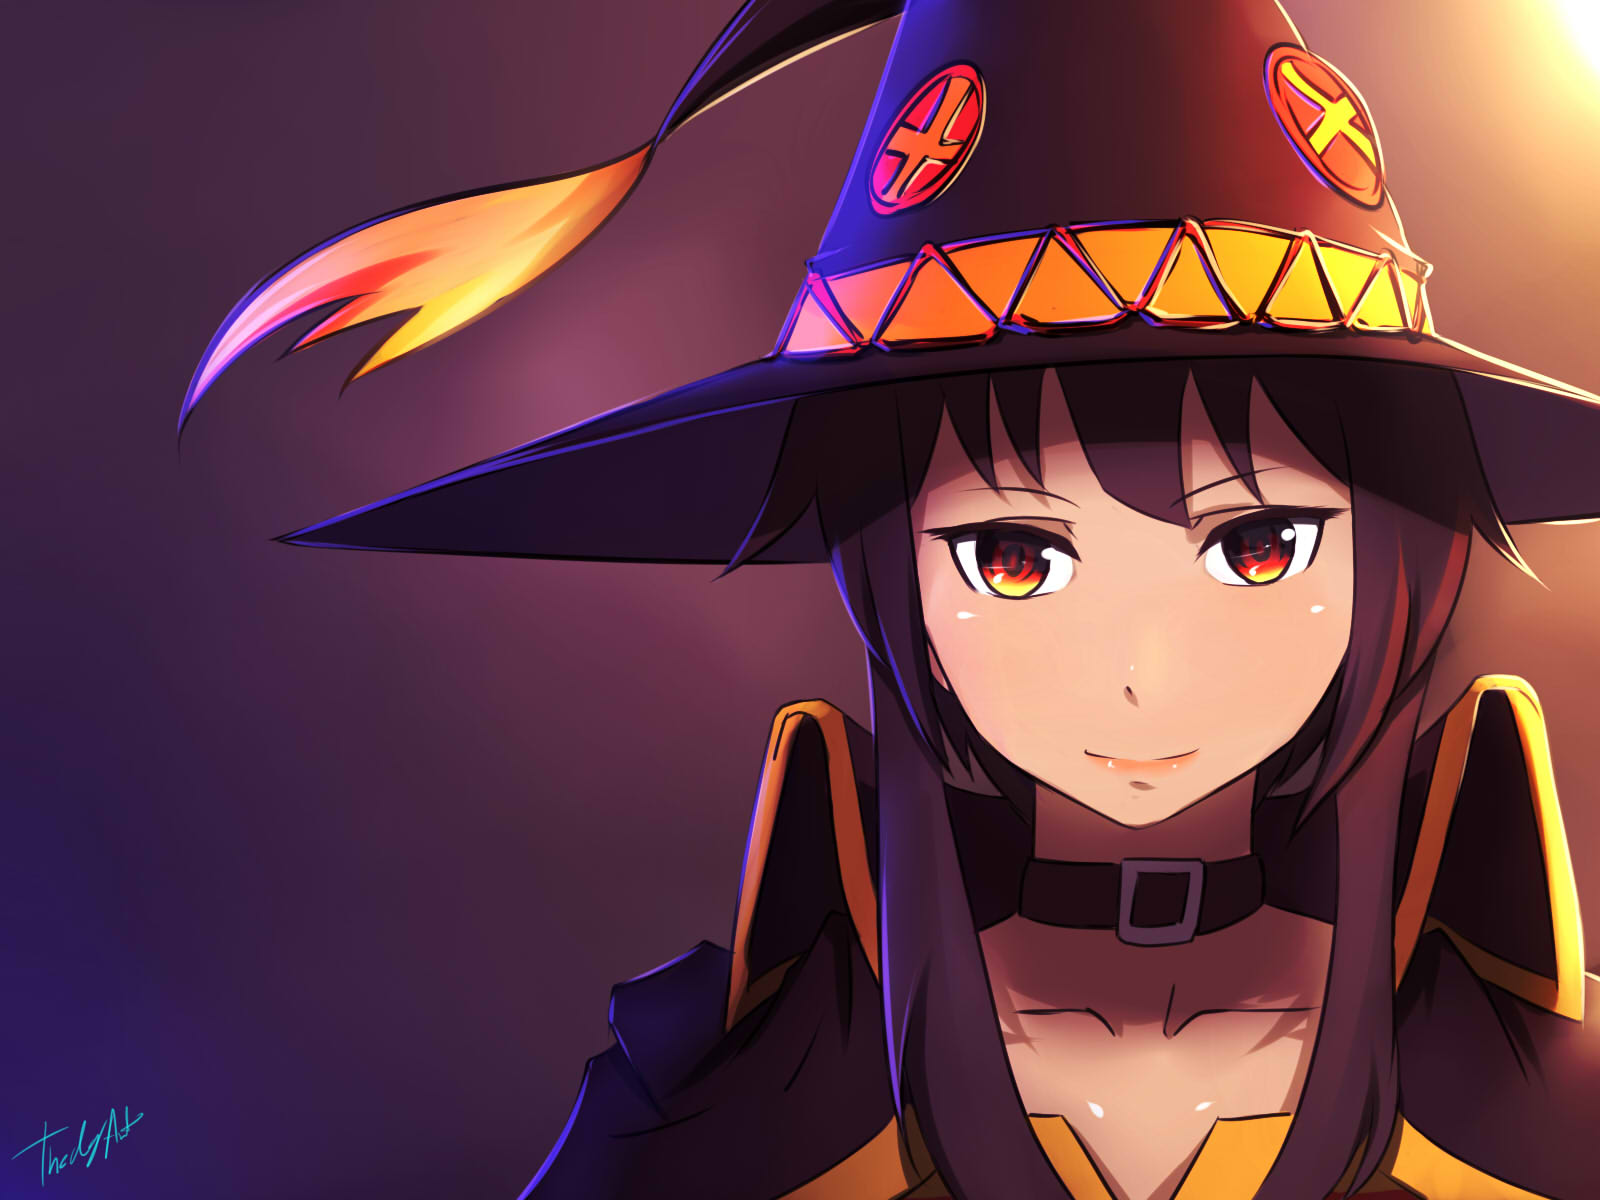 Megumin by ThedgArt